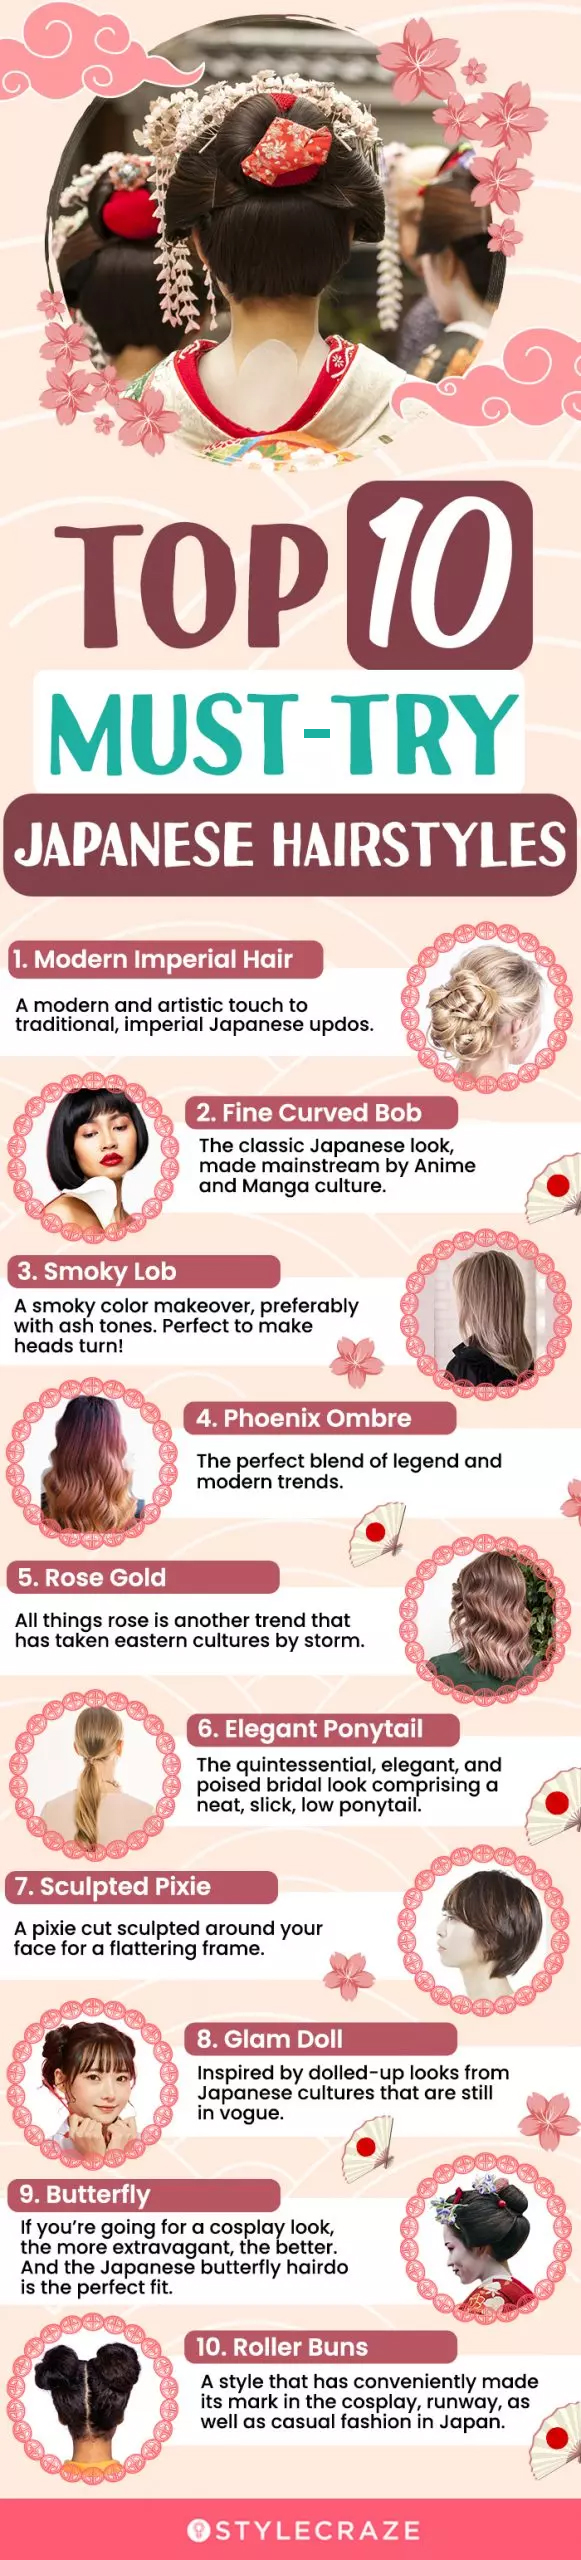 japanese hairstyles (infographic)